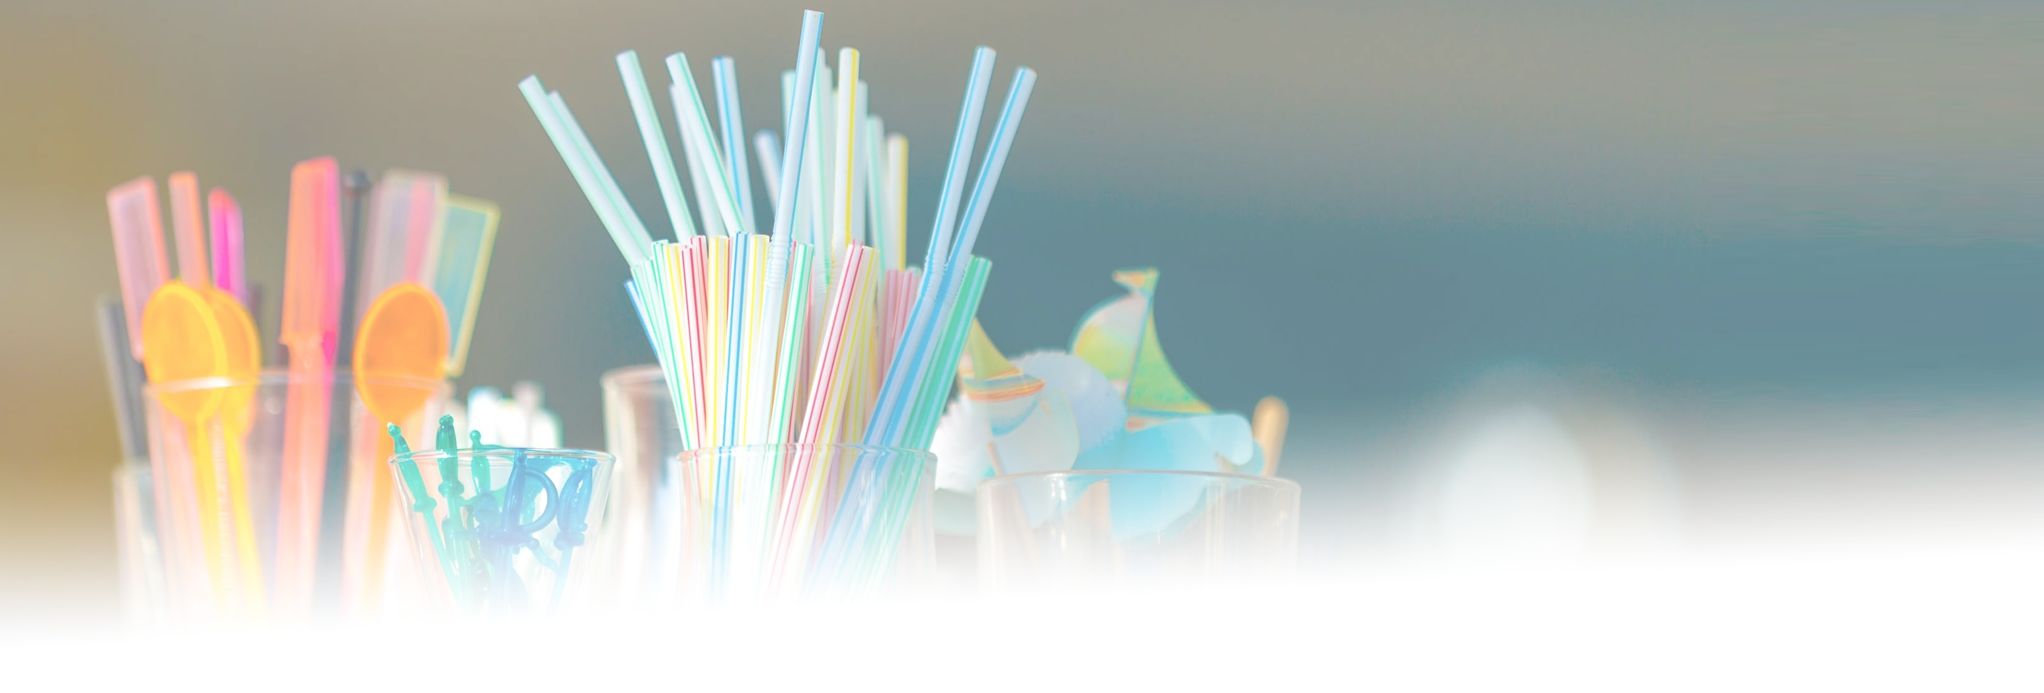 Buy Quality, Wholesale Straws in Bulk - Compostable, Plastic